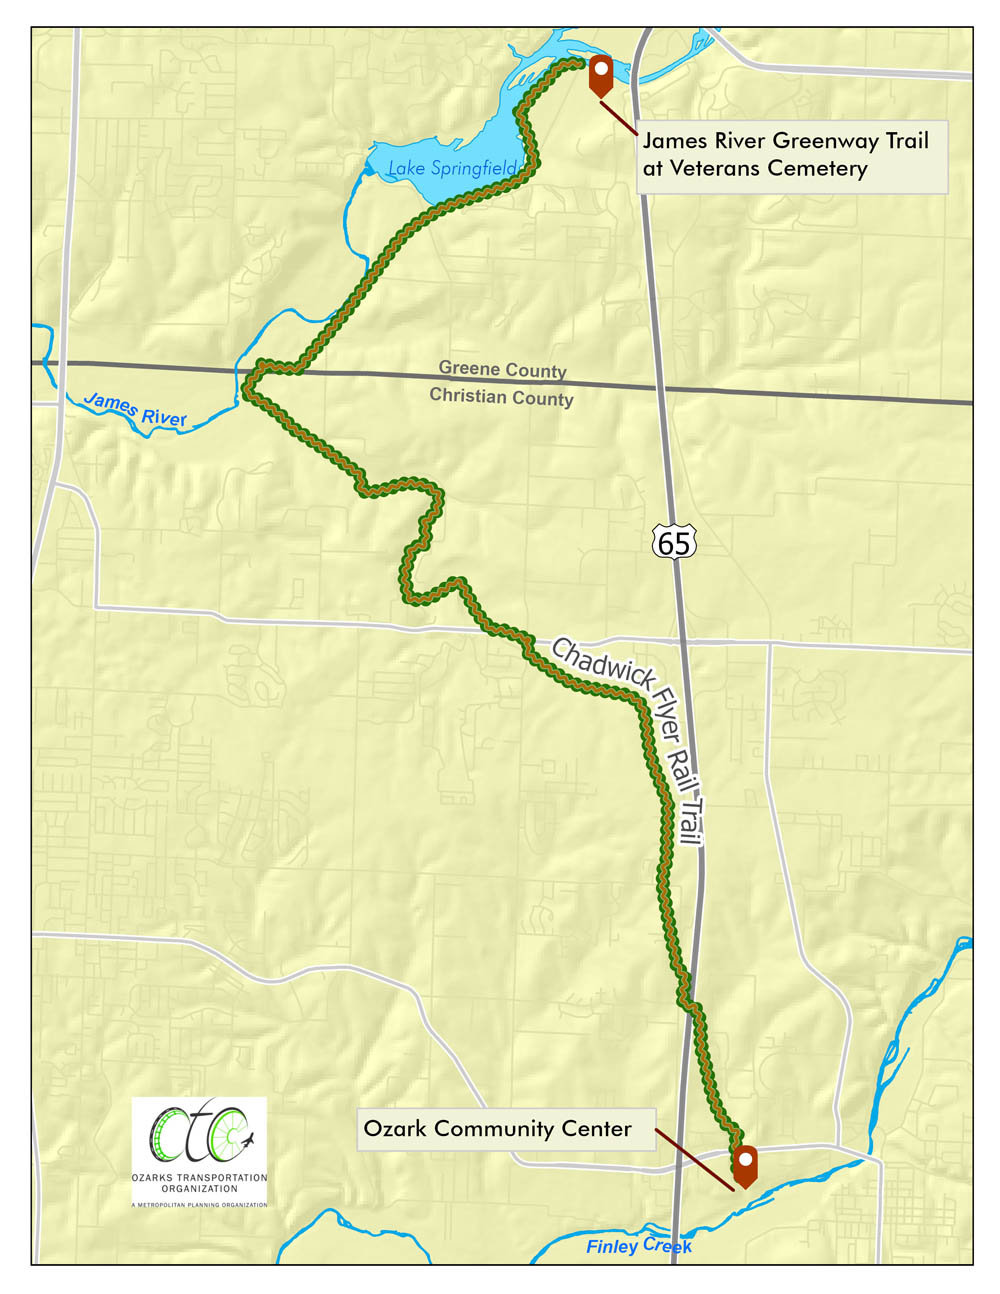 MAPPING THE COURSE: A steering committee is focused on the main spine of the Chadwick Flyer Rail Trail, where it would connect with the James River Greenway to the Ozark Community Center.